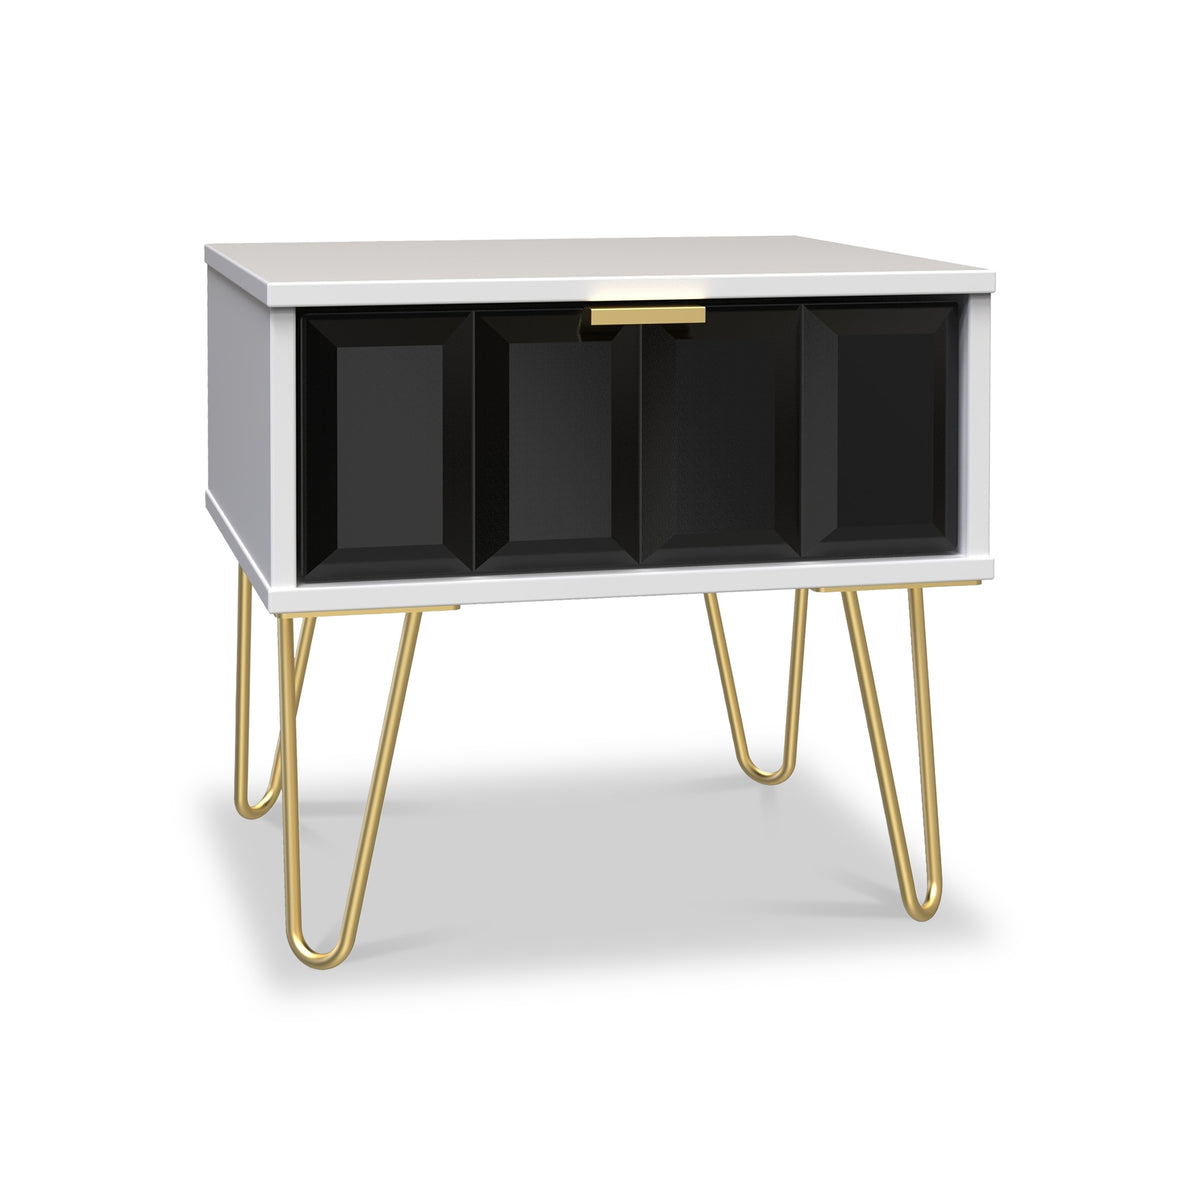 Harlow 1 Drawer Bedside Table from Roseland Furniture